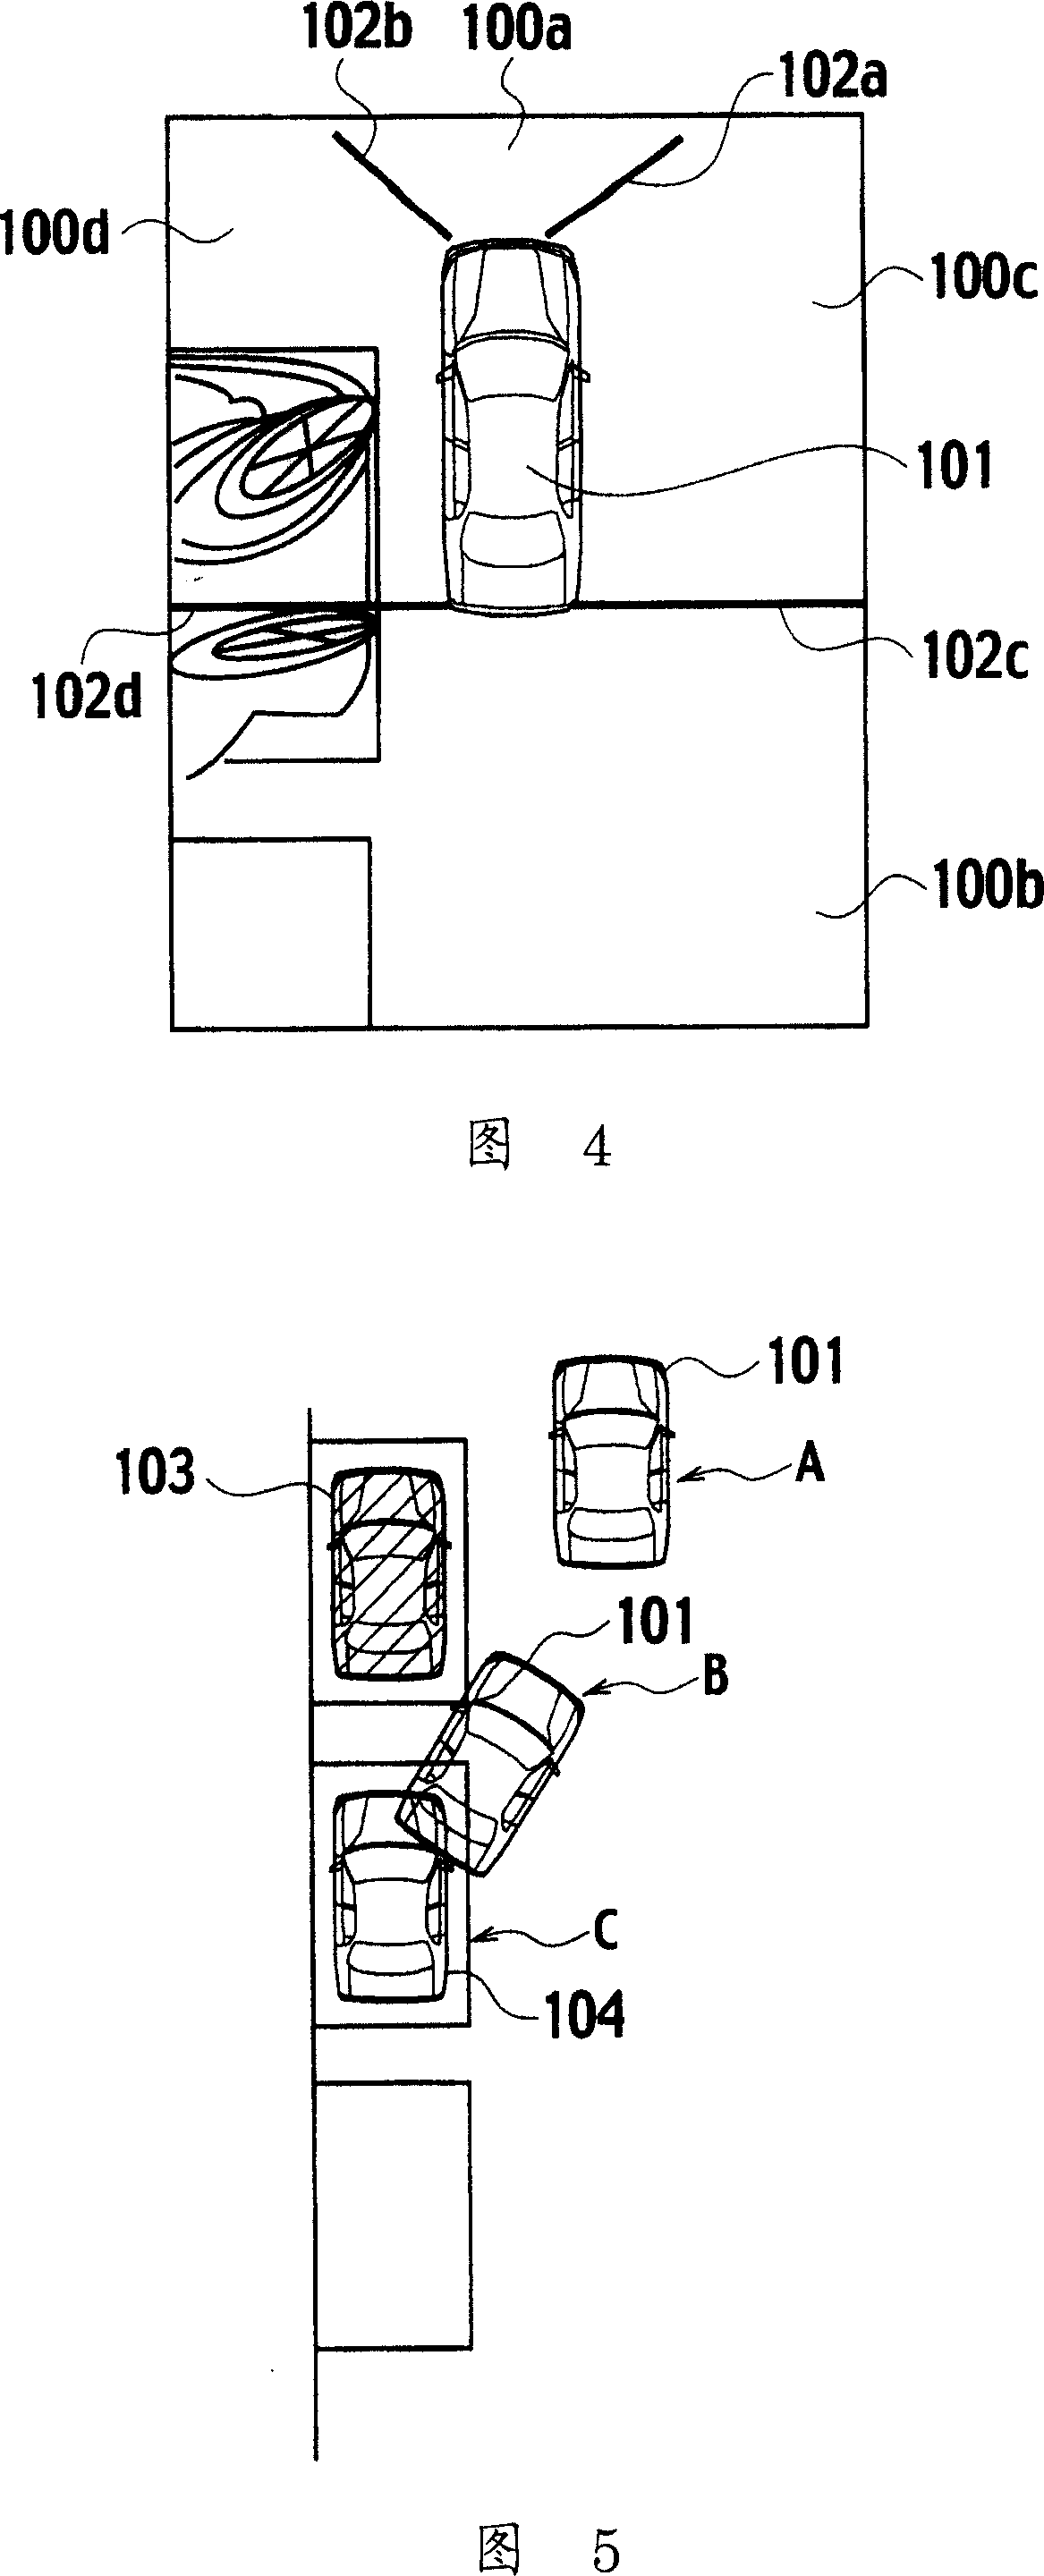 Driving support system and method of producing overhead view image